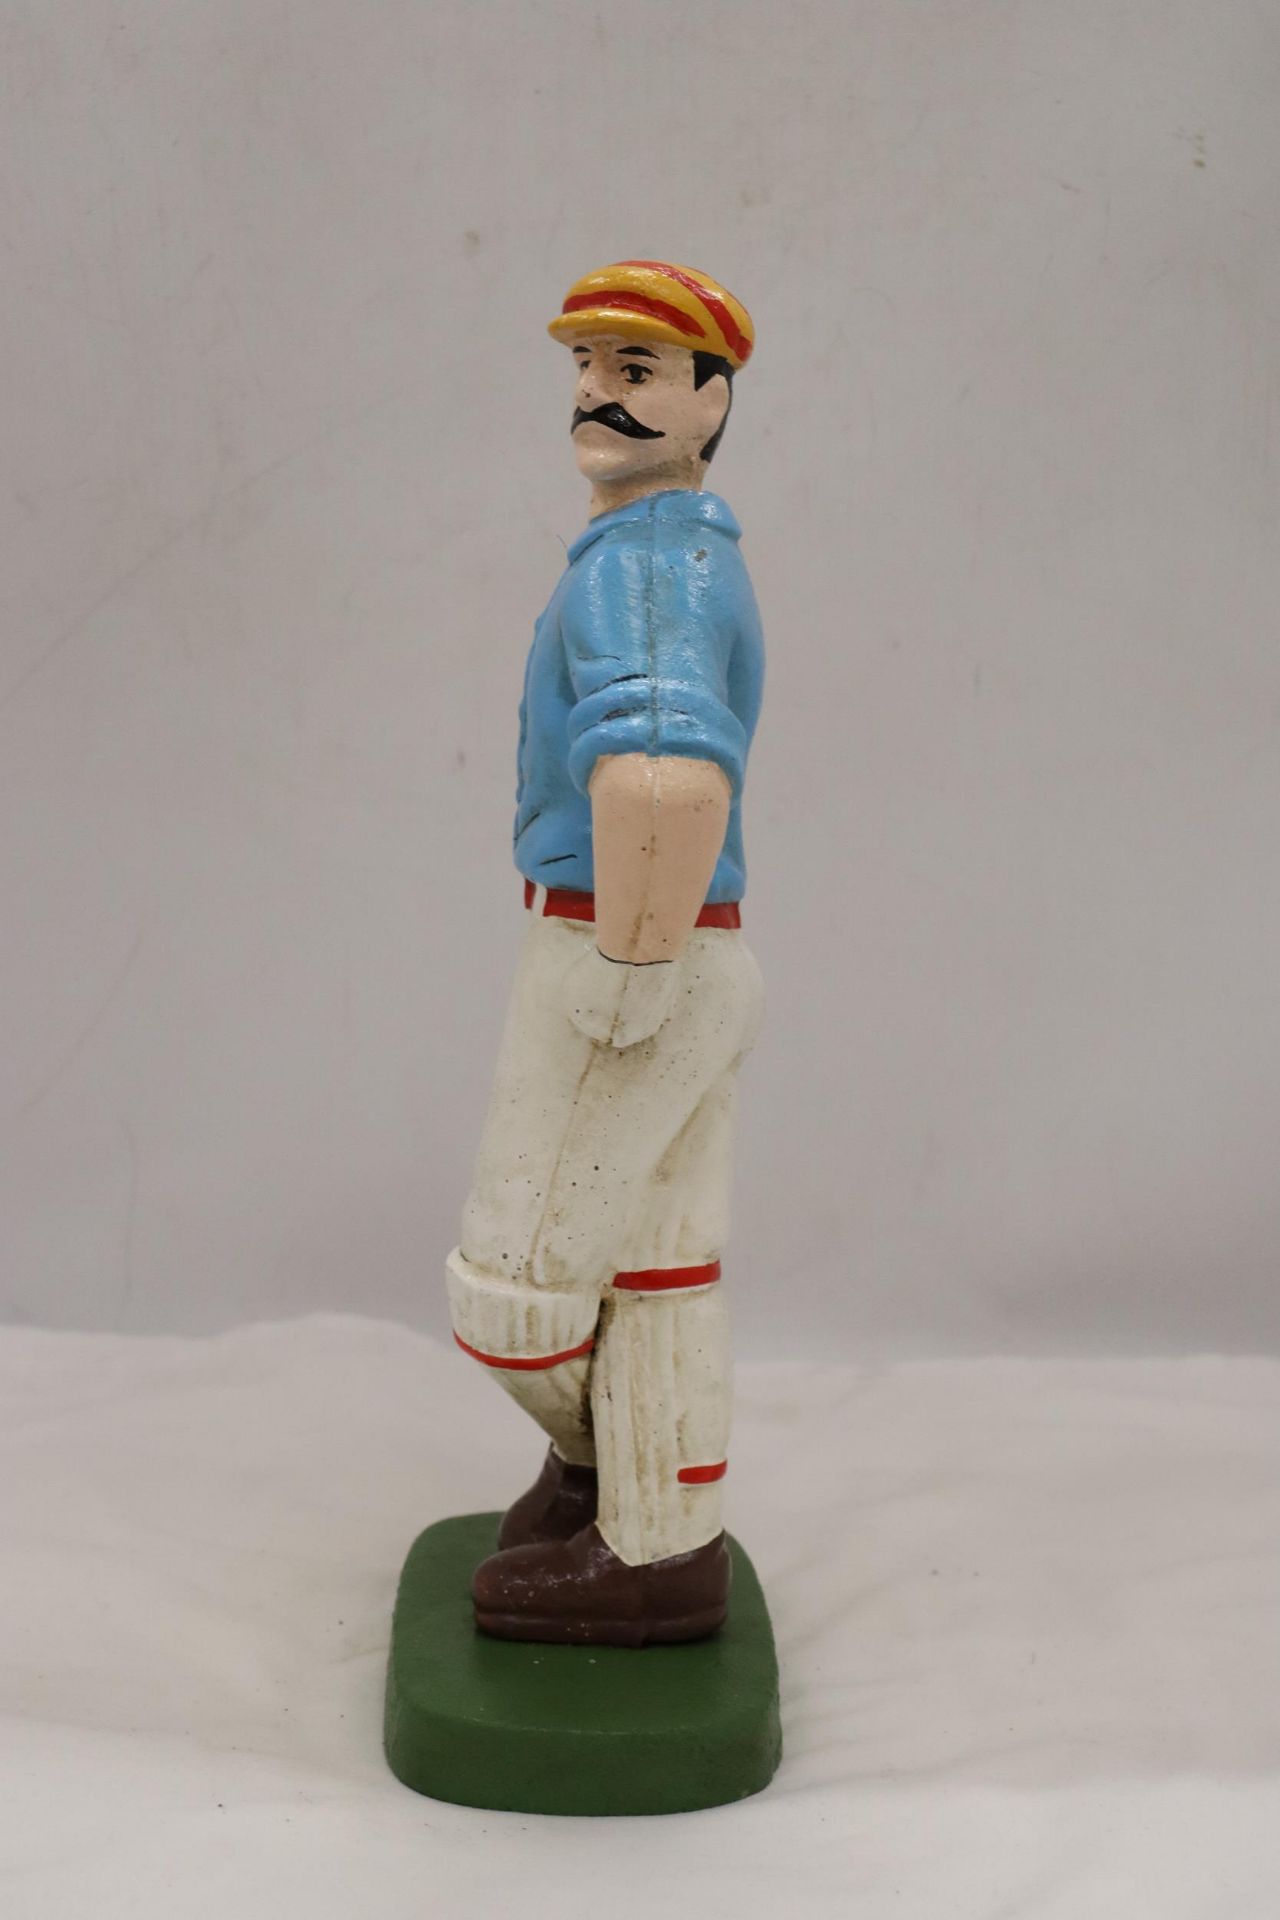 A VERY HEAVY SOLID CAST VICTORIAN CRICKETER DOORSTOP, HEIGHT 32CM - Image 2 of 5